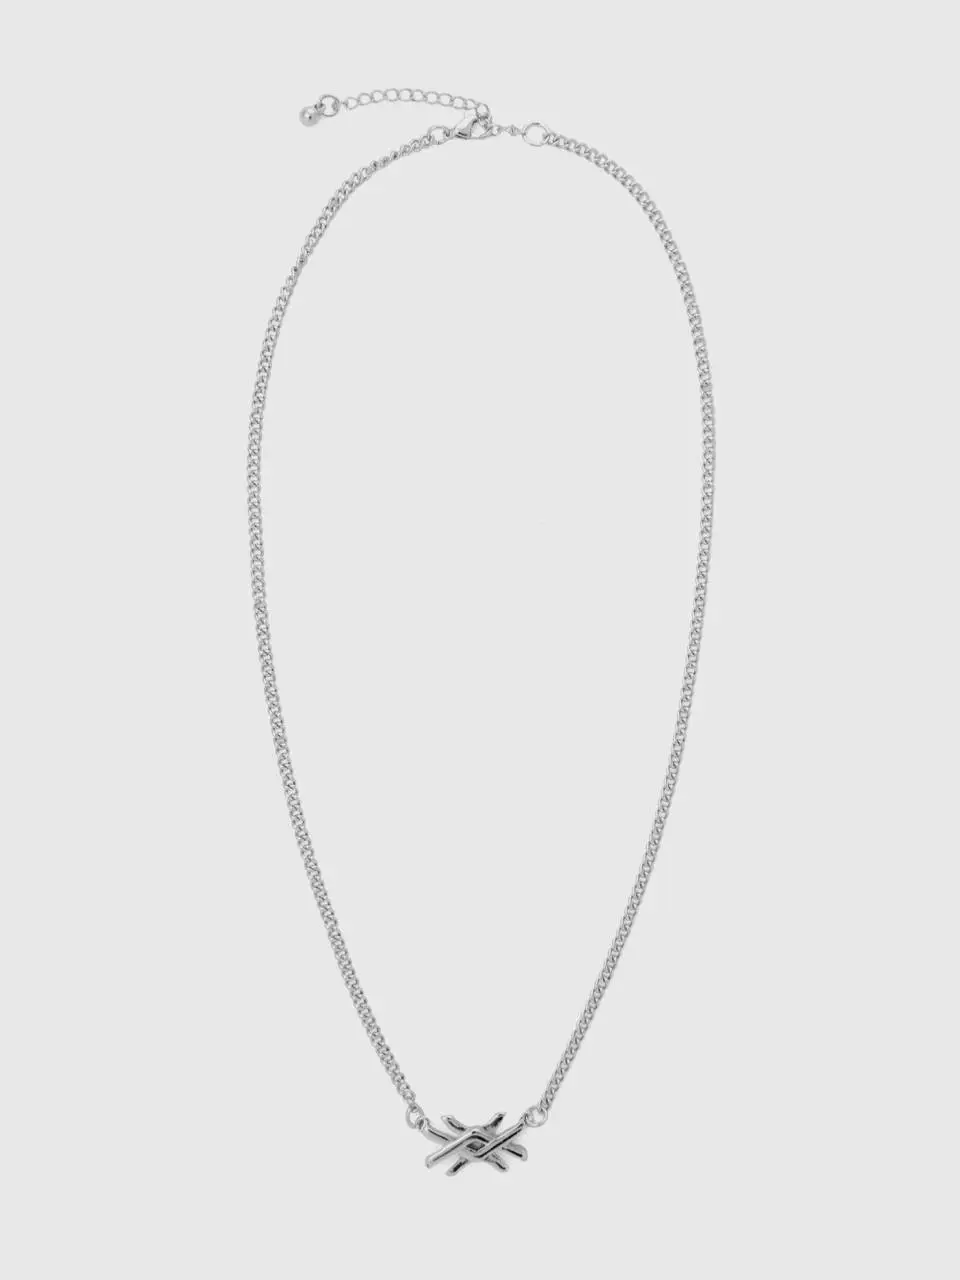 Benetton silver necklace with logo. 1